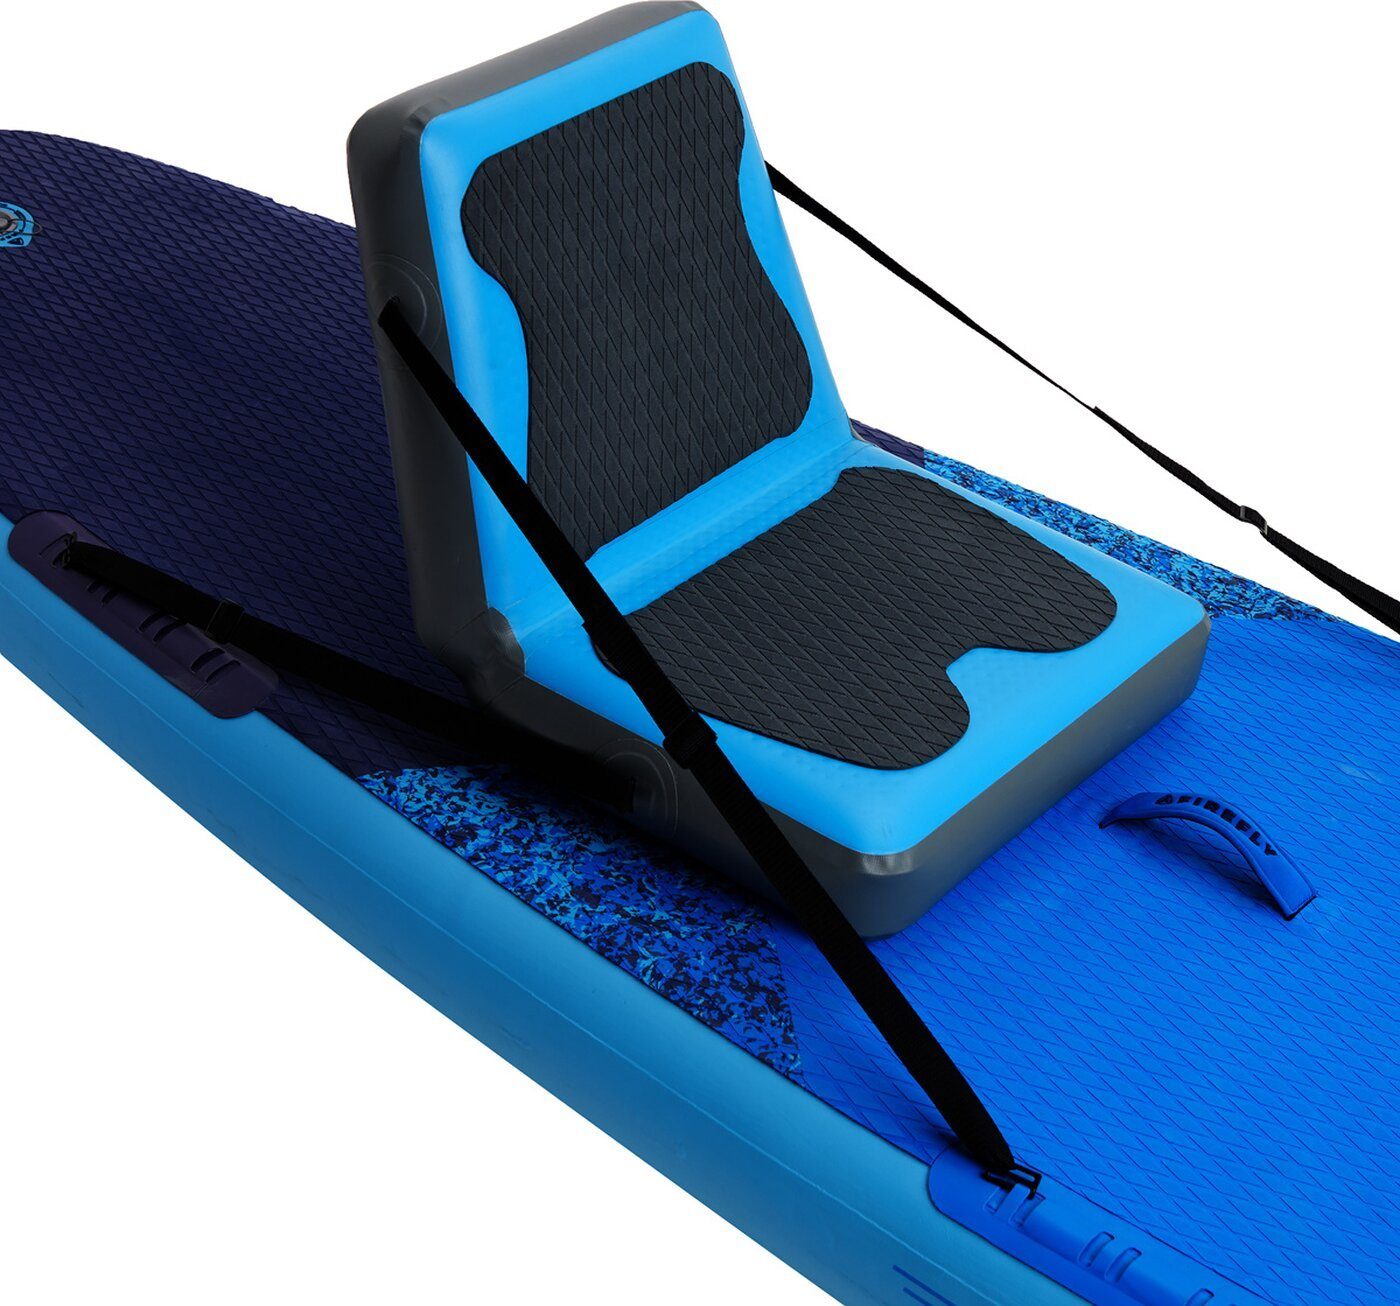 FIREFLY SUP-Rückenlehne Inflatable Seat SUP I SUP-Zubehör